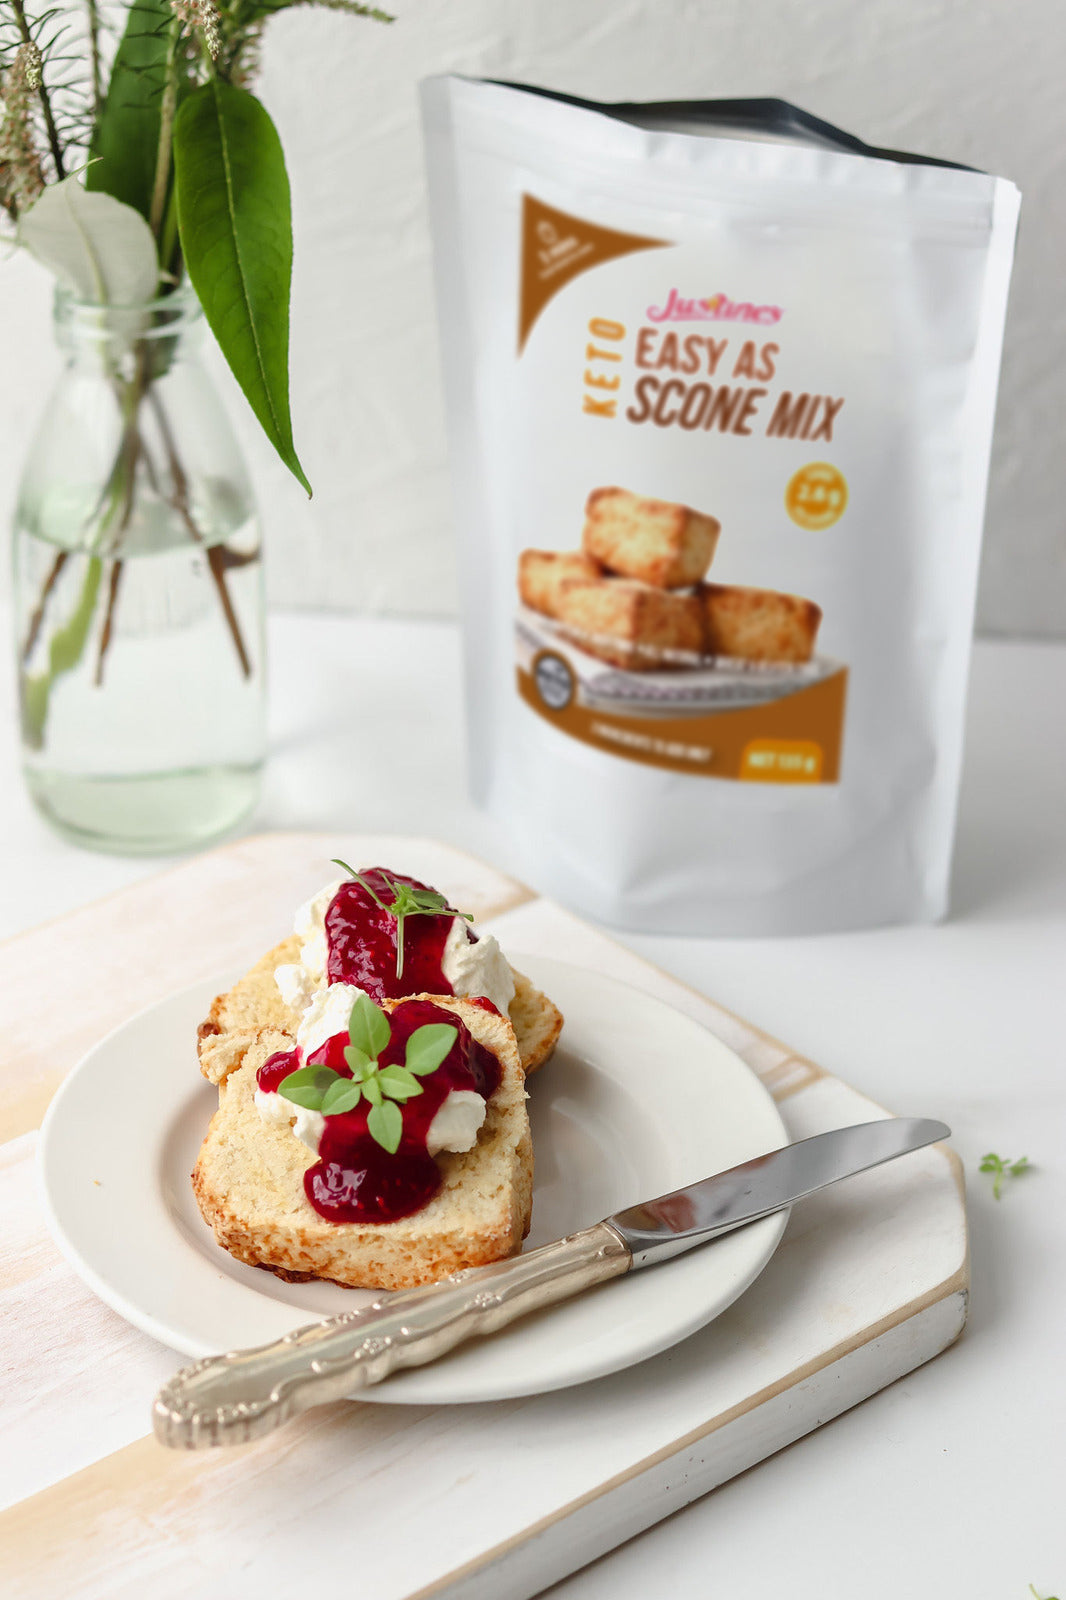 Keto Scone with Jam and Cream and Justine's Keto Scone Mix Pouch